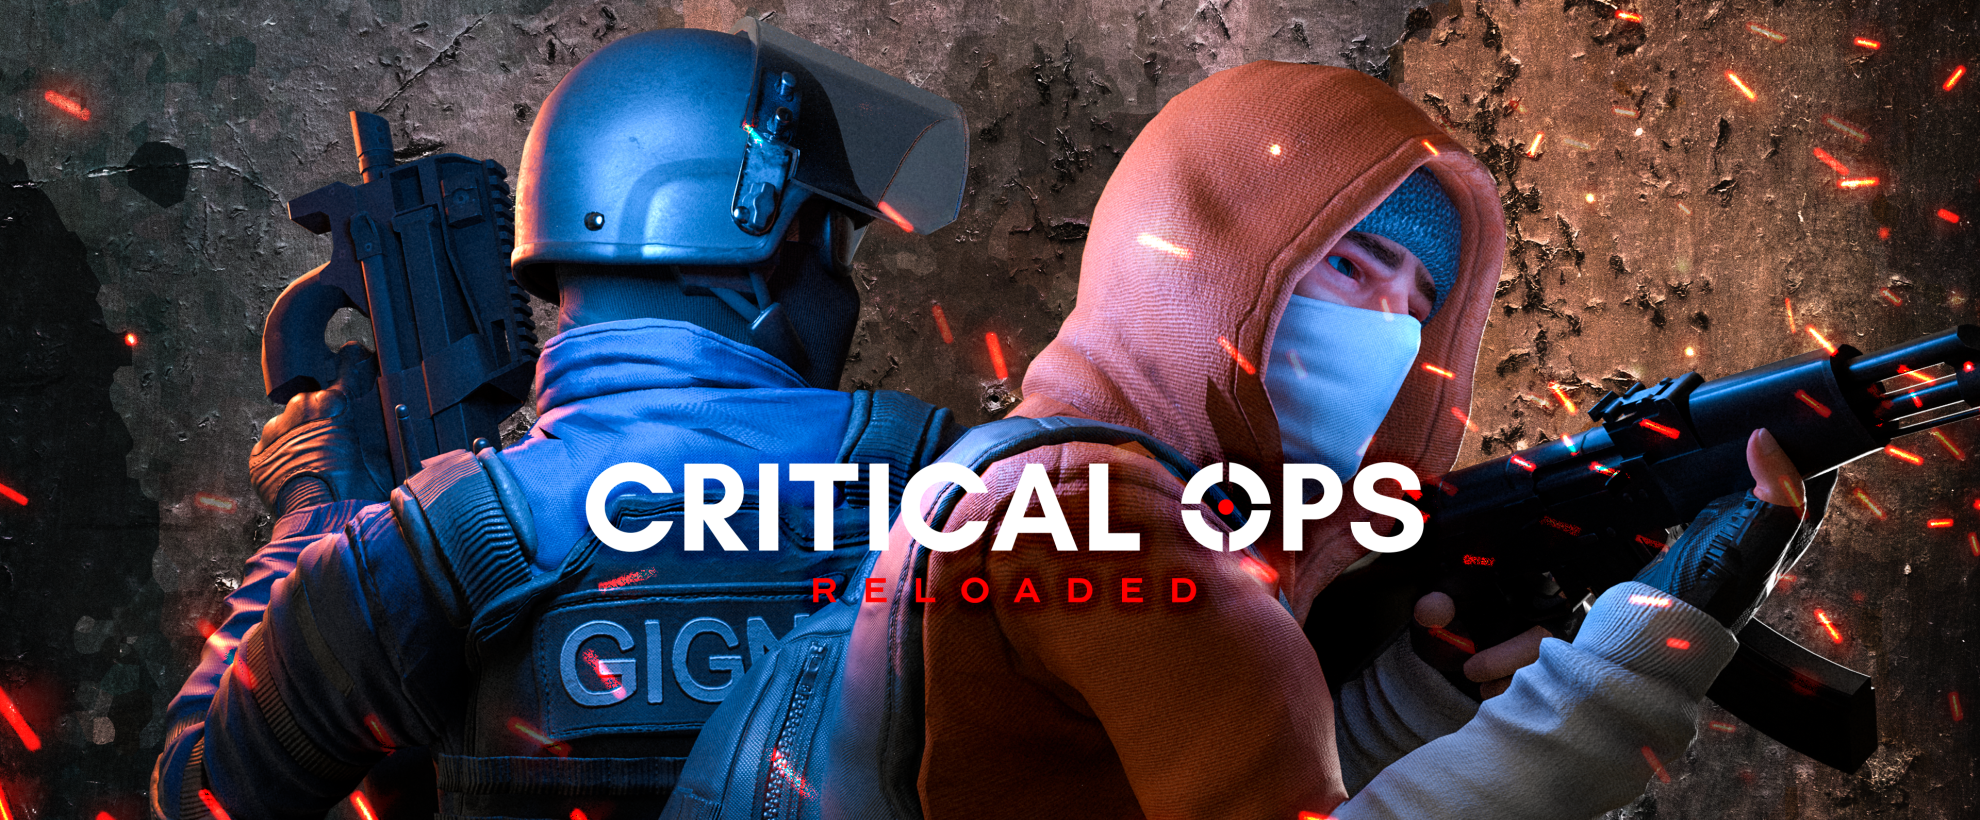 critical ops pc browser